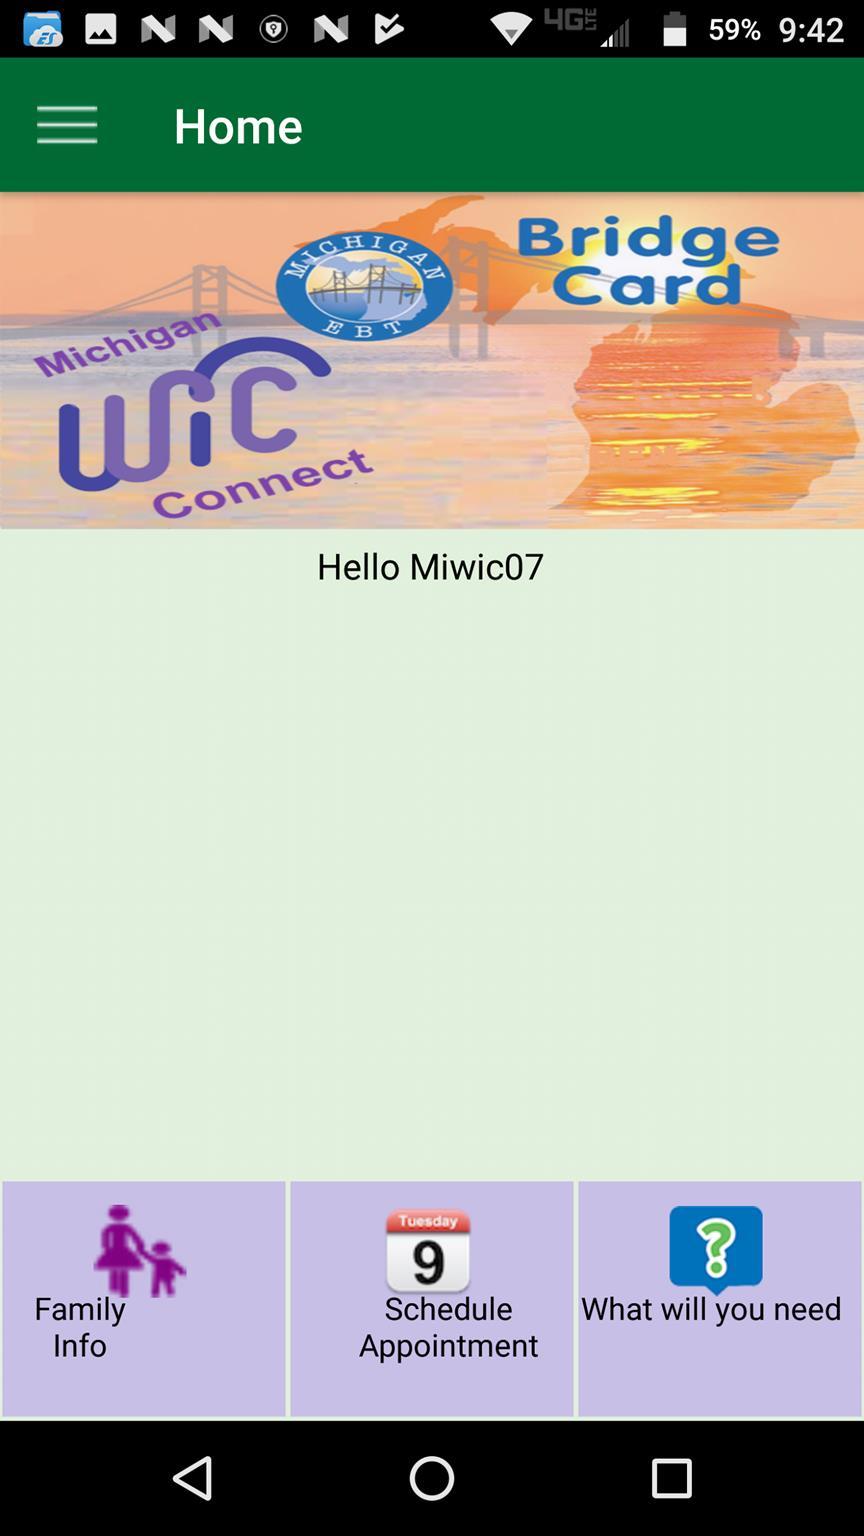 Home Screen After registering as a prospective WIC client,the home page